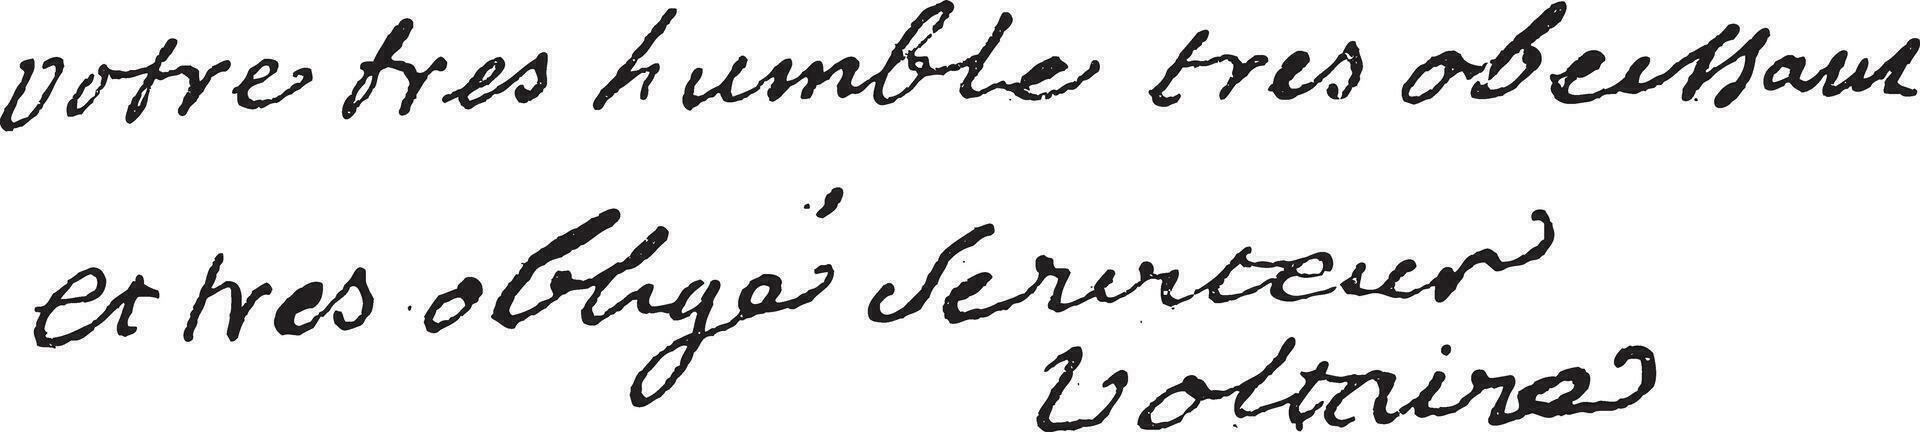 Signature of Francois-Marie Arouet or Voltaire  1694-1778, vintage engraving. vector